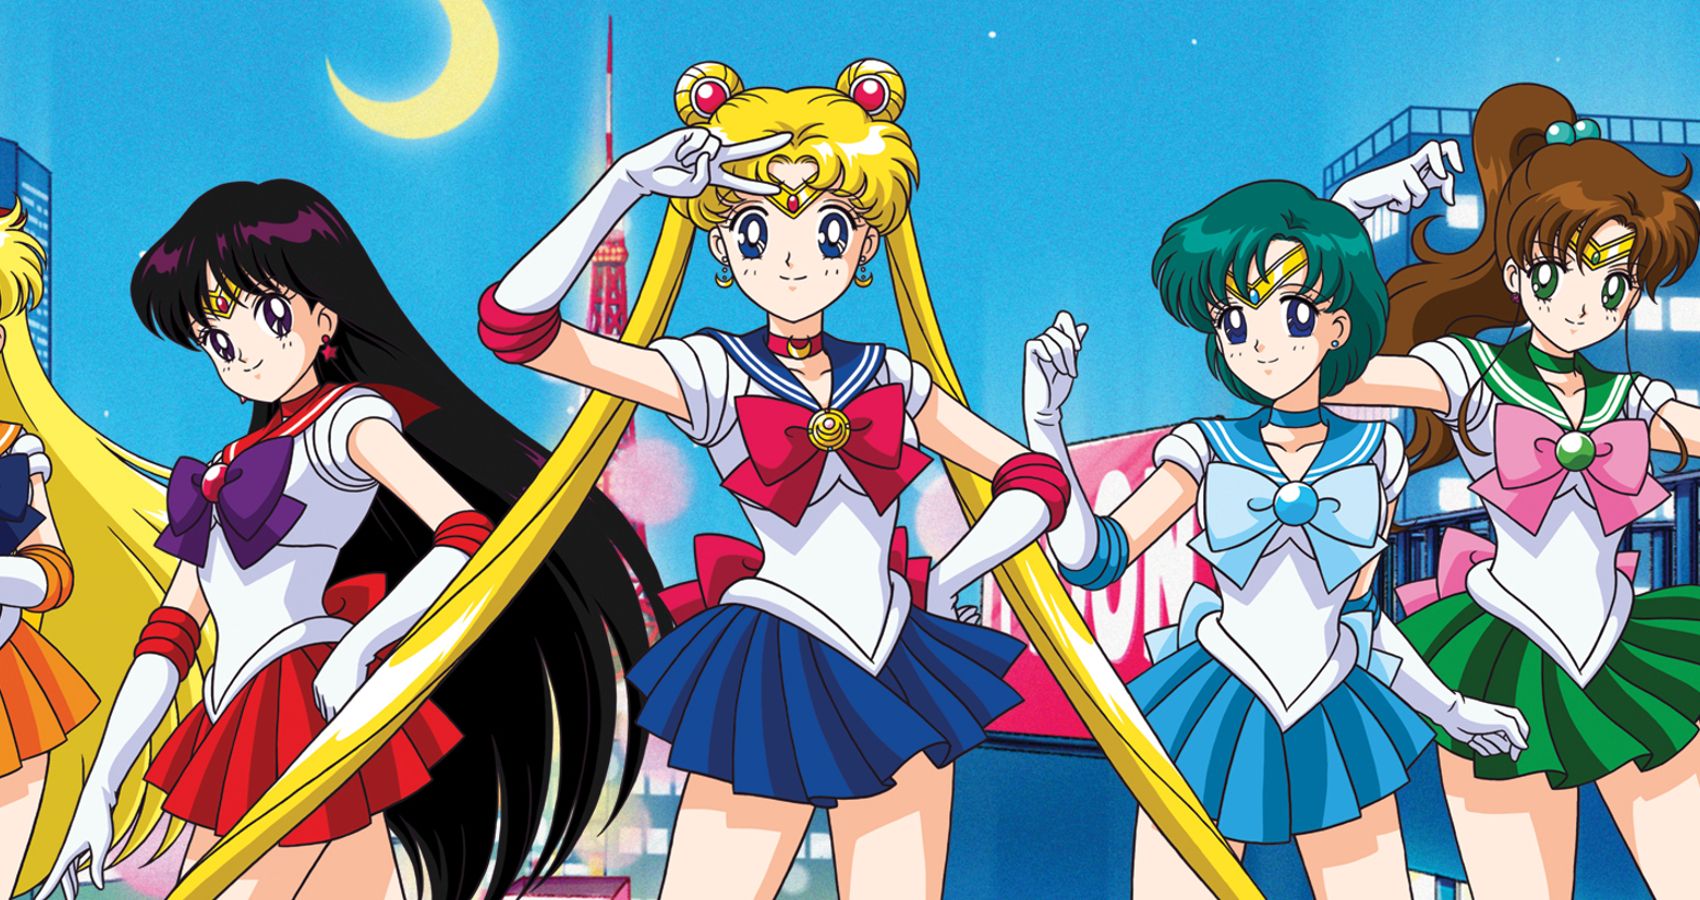 Naiiki - Sparkle Pipsi made a MBTI Personality Chart based on Sailor Moon  characters! I got INFJ, or Hotaru Tomoe/Sailor Saturn (my favorite!). You  can take a test here to find out